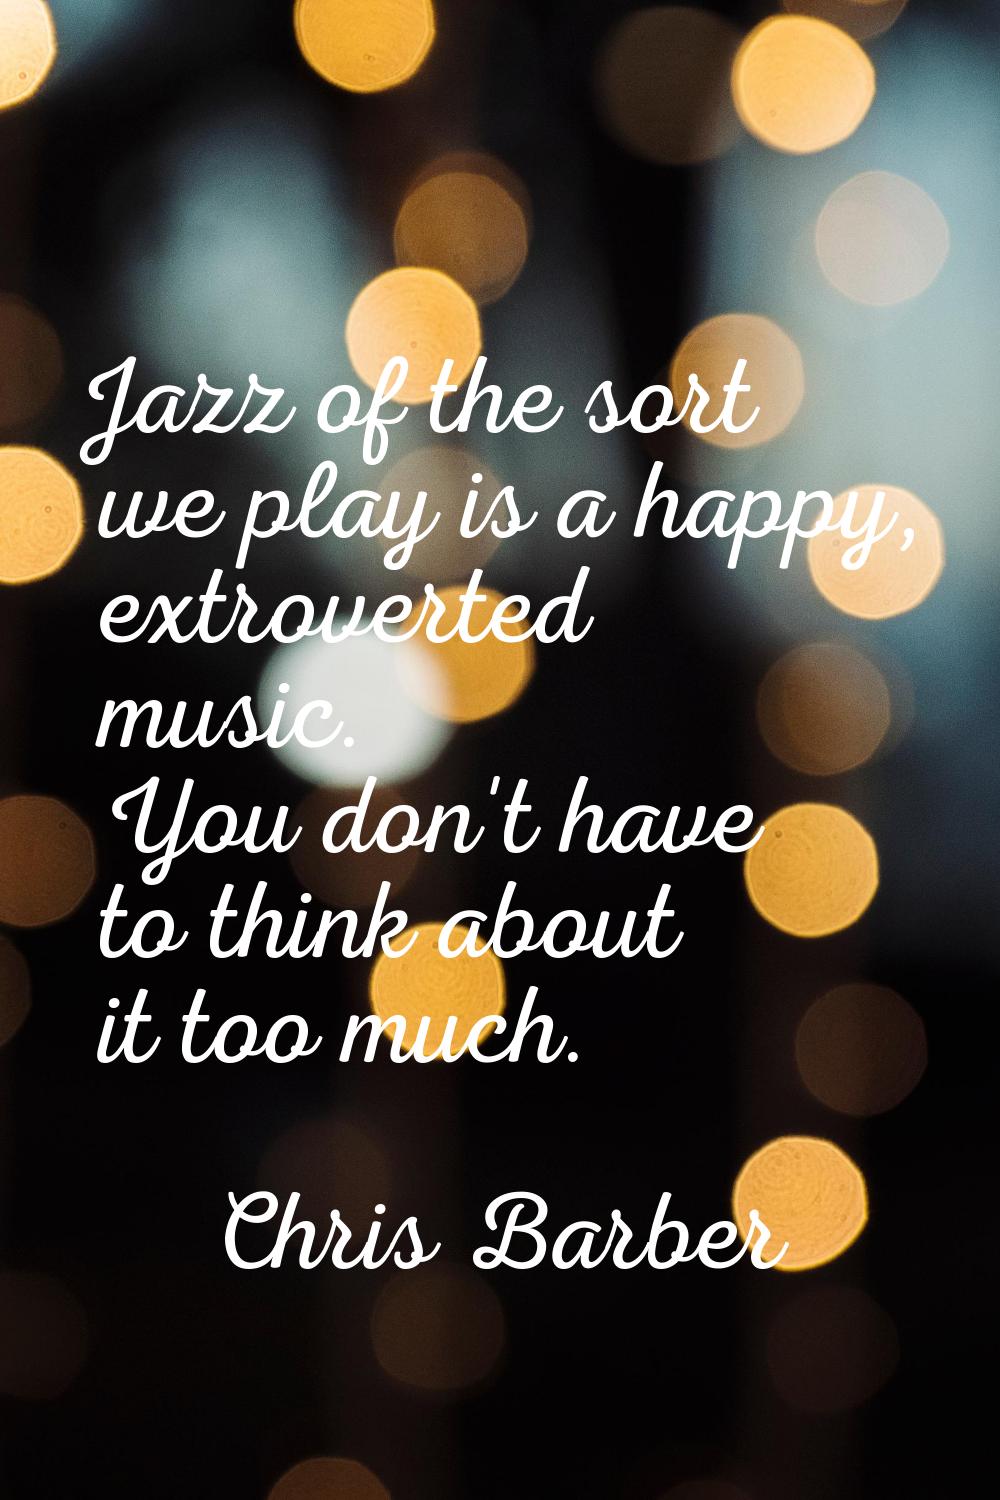 Jazz of the sort we play is a happy, extroverted music. You don't have to think about it too much.